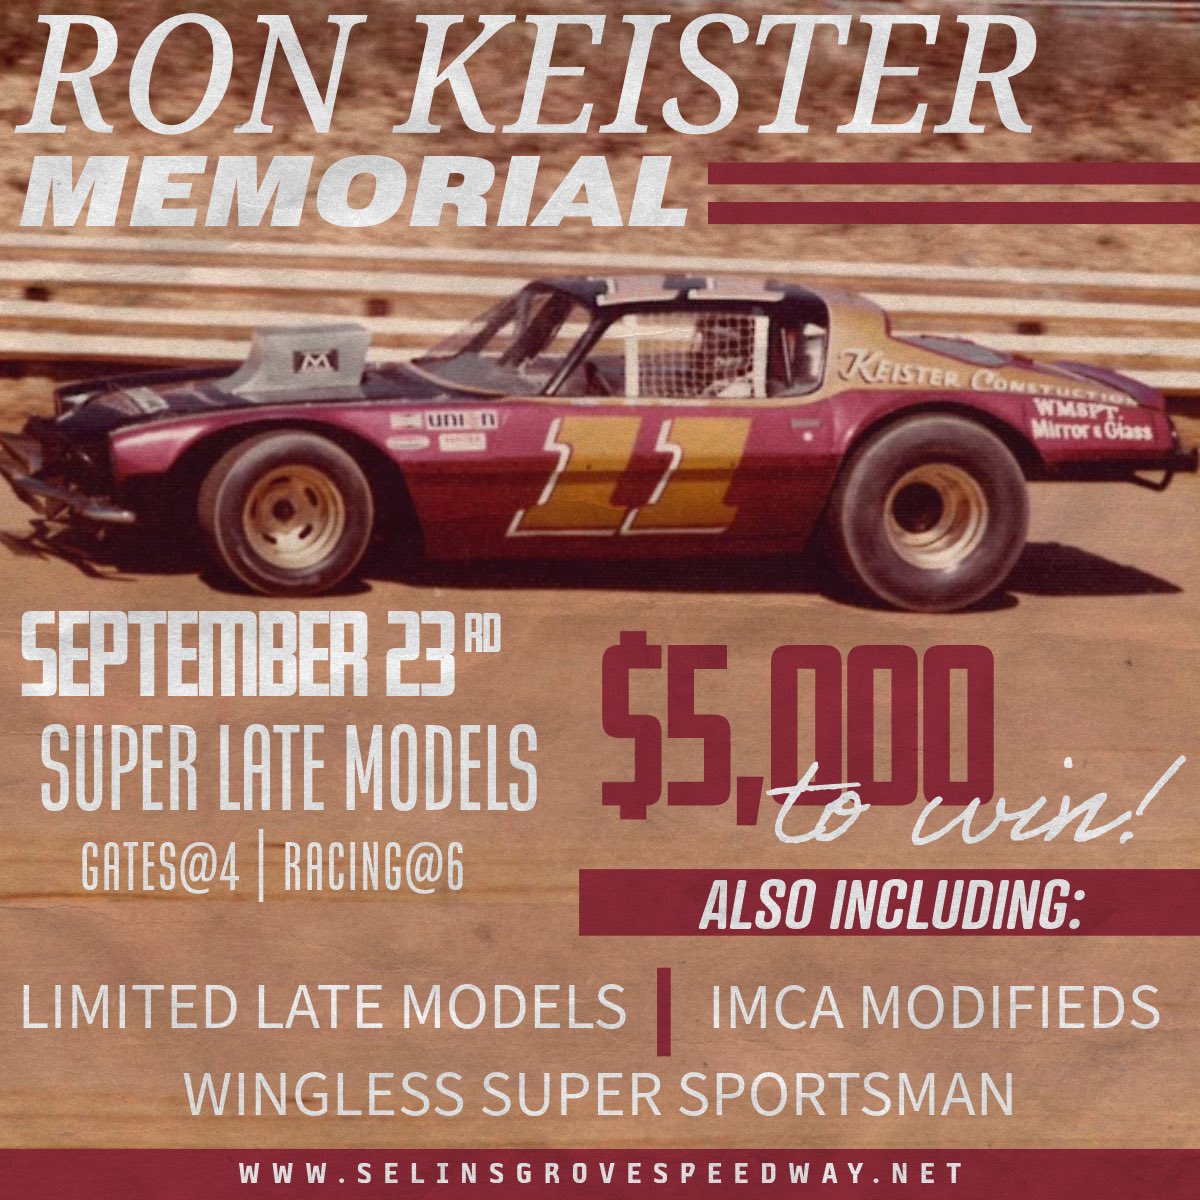 ☔️CANCELLED☔️ With showers forecasted we are unfortunately going to have to cancel todays Jim Nace Memorial. No makeup date. BUT next years 358/360 event will now pay $10K TO WIN! AND We will move the Limited Late Models, Wingless Super Sportsman & add the IMCA Mod’s to 9/23.